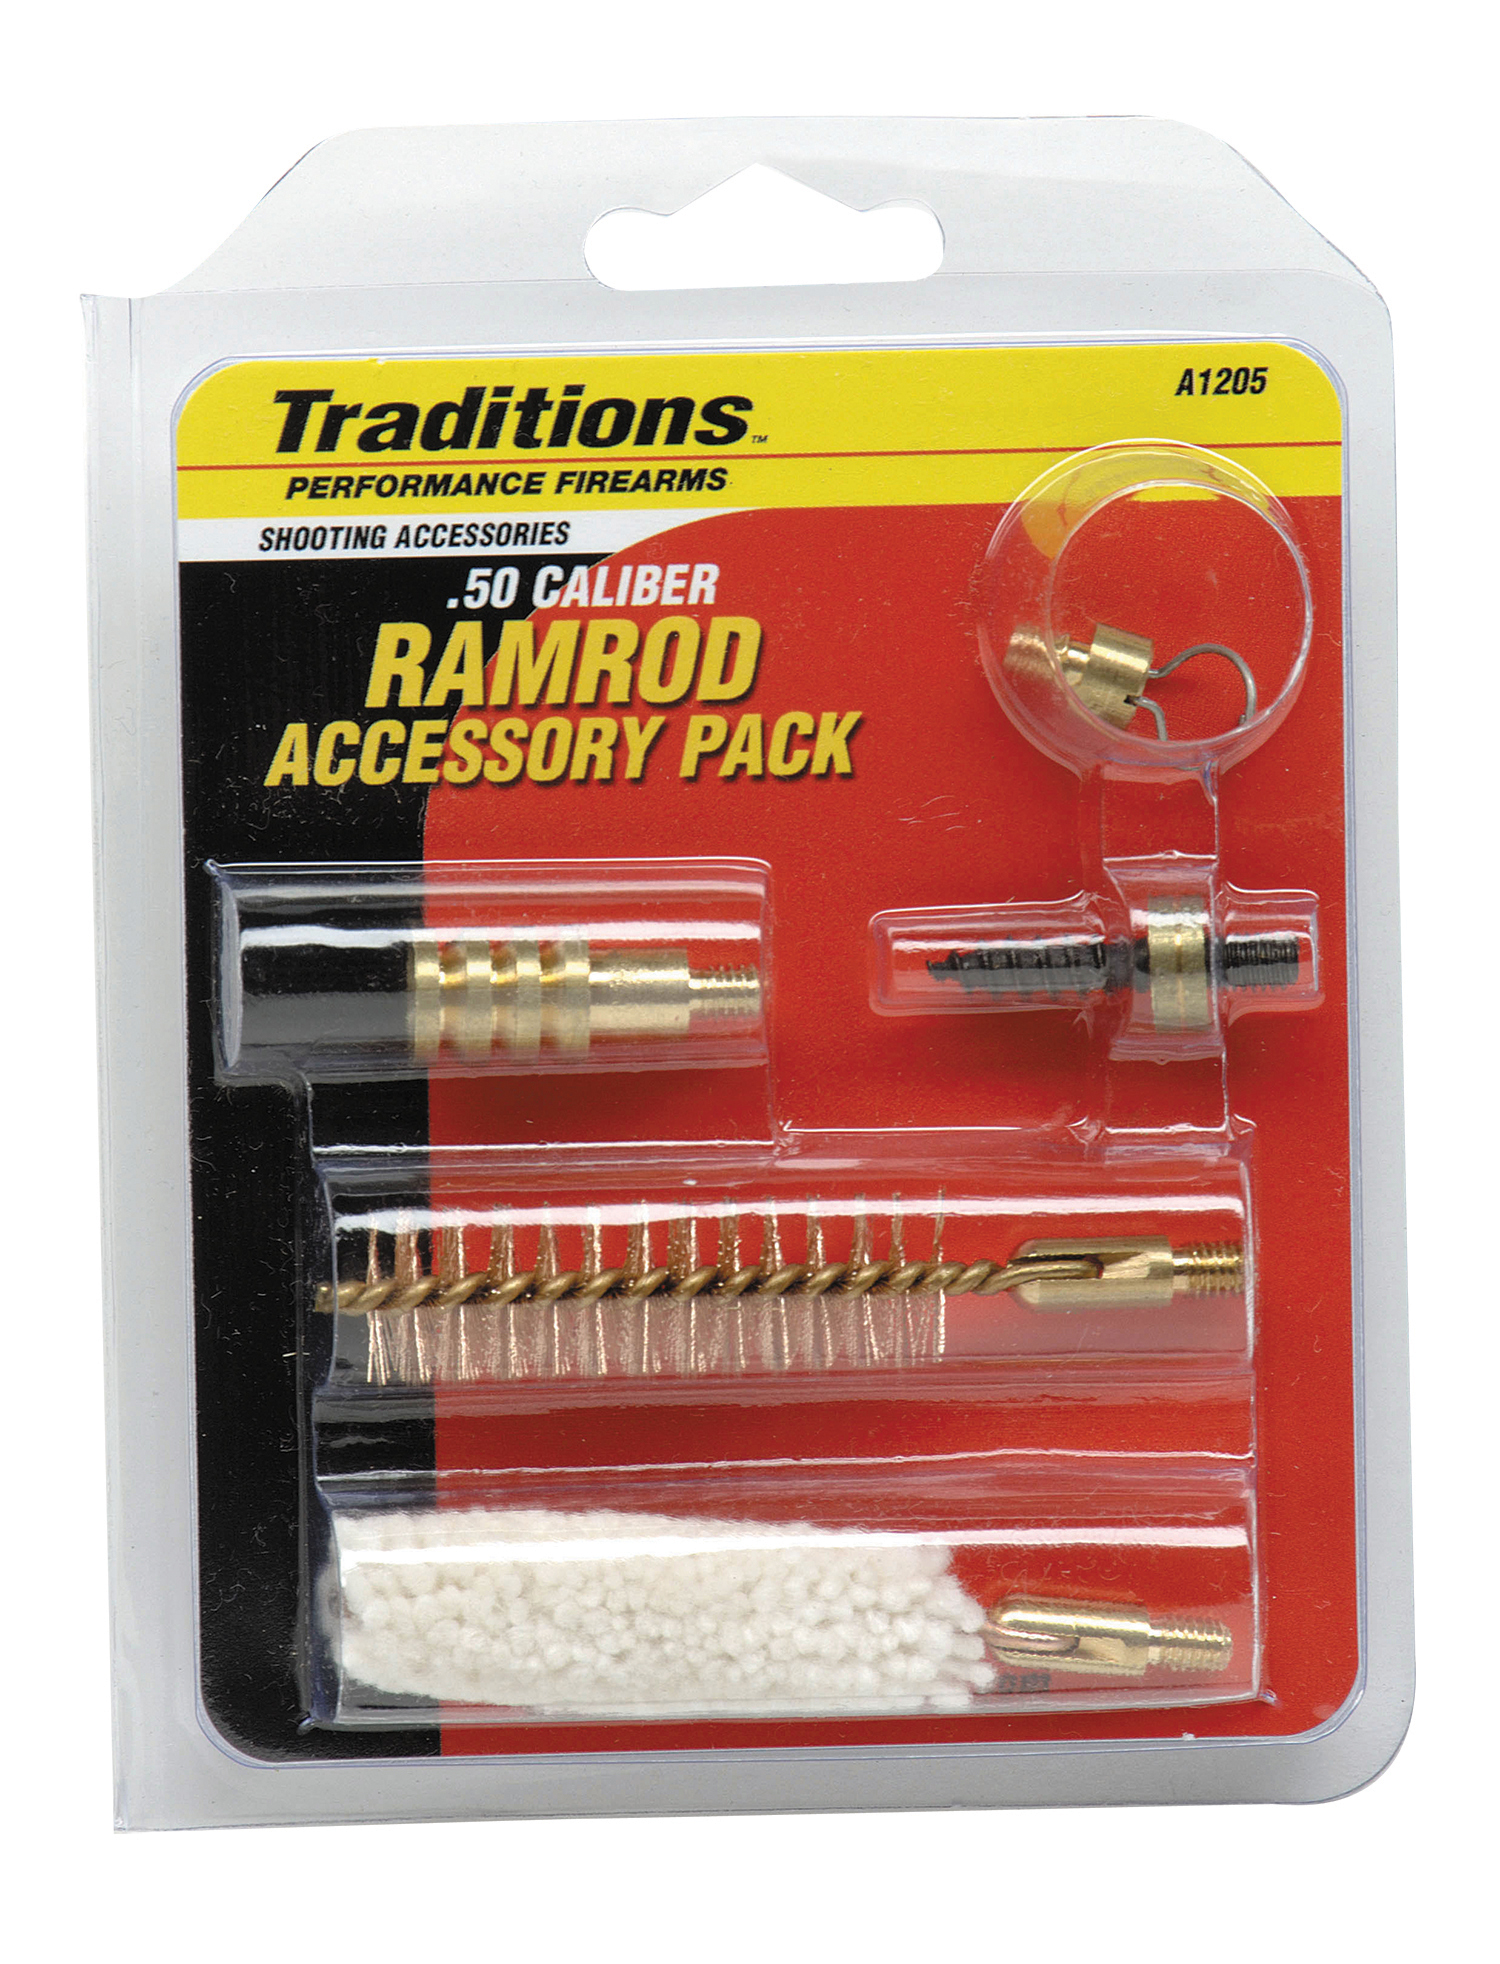 Ramrod Accessory Pack Muzzle-Loaders™ Ramrod Accessories Pack .50 Caliber 